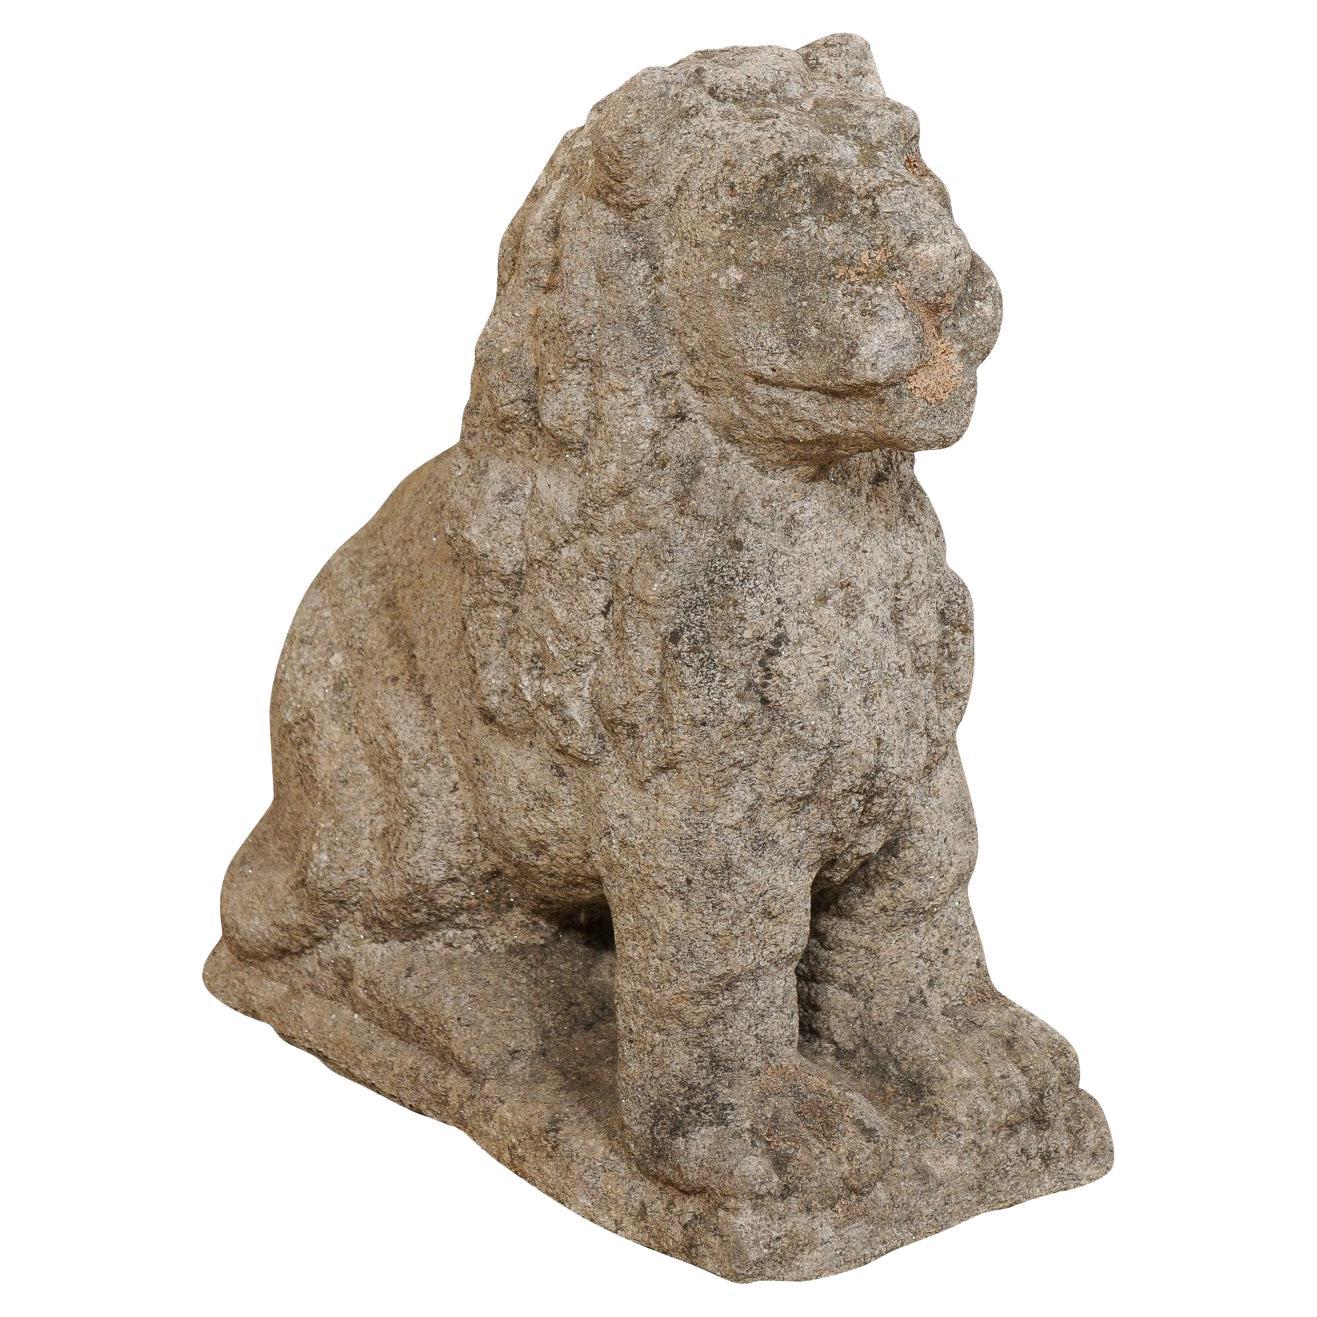 18th Century Hand-Carved Stone Lion Garden Statue from Europe